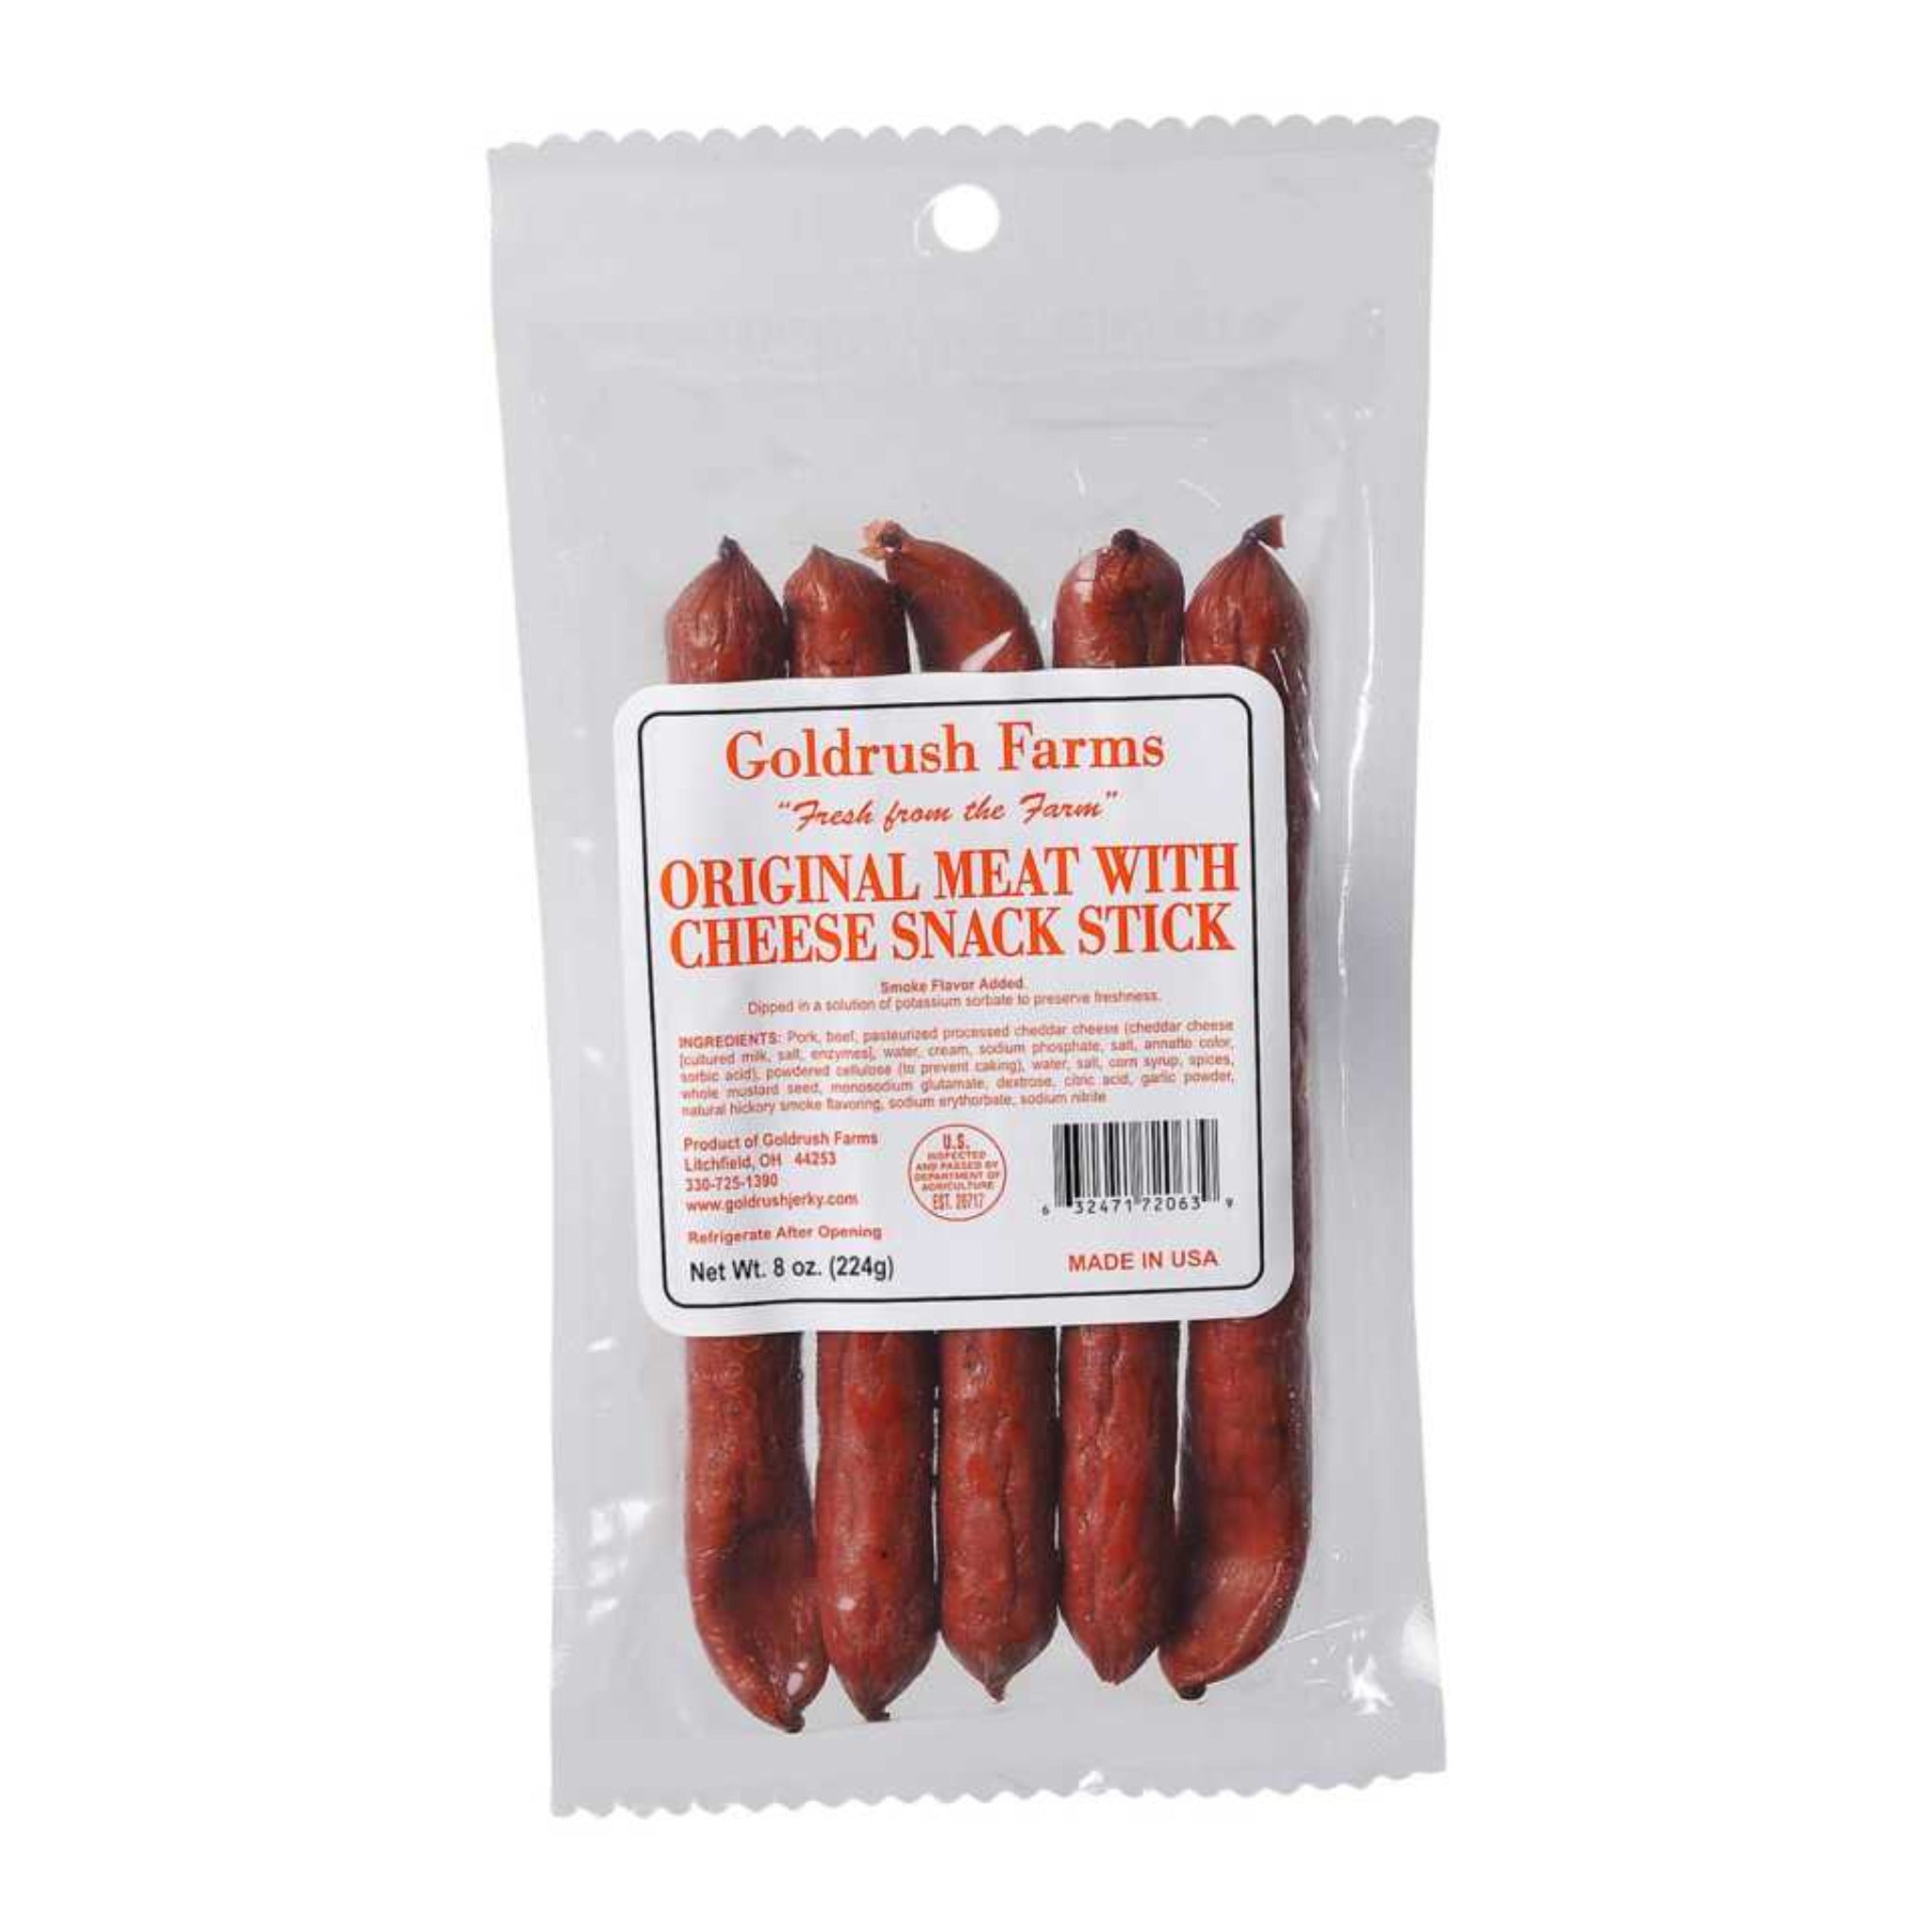 Original Meat with Cheese Snack Stick